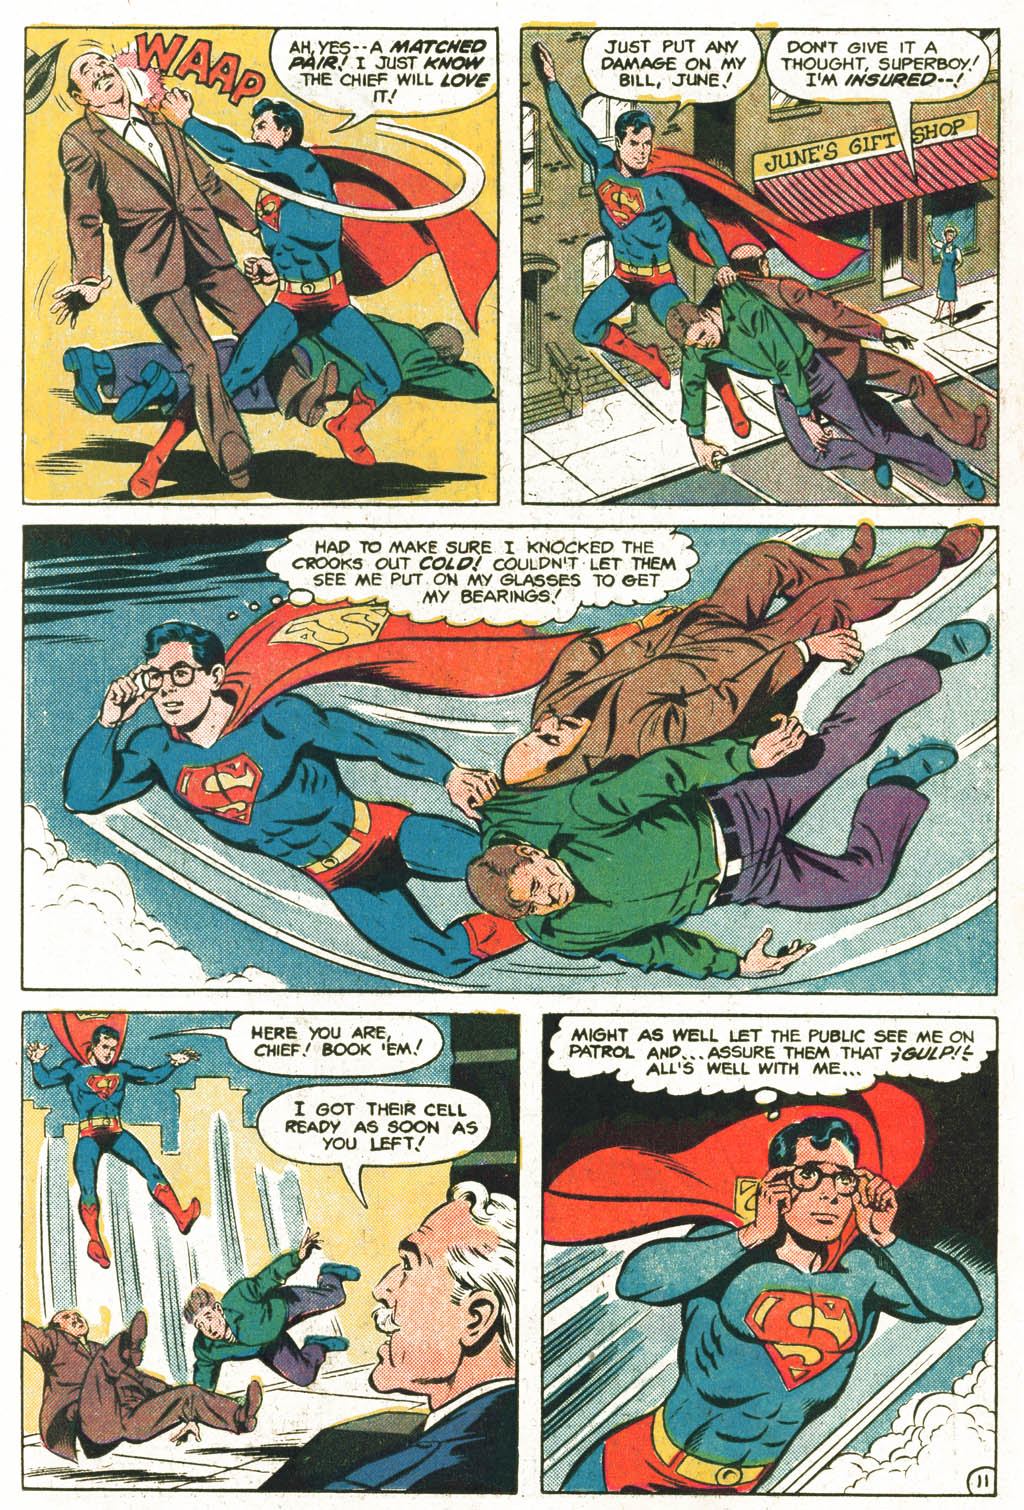 The New Adventures of Superboy 24 Page 11